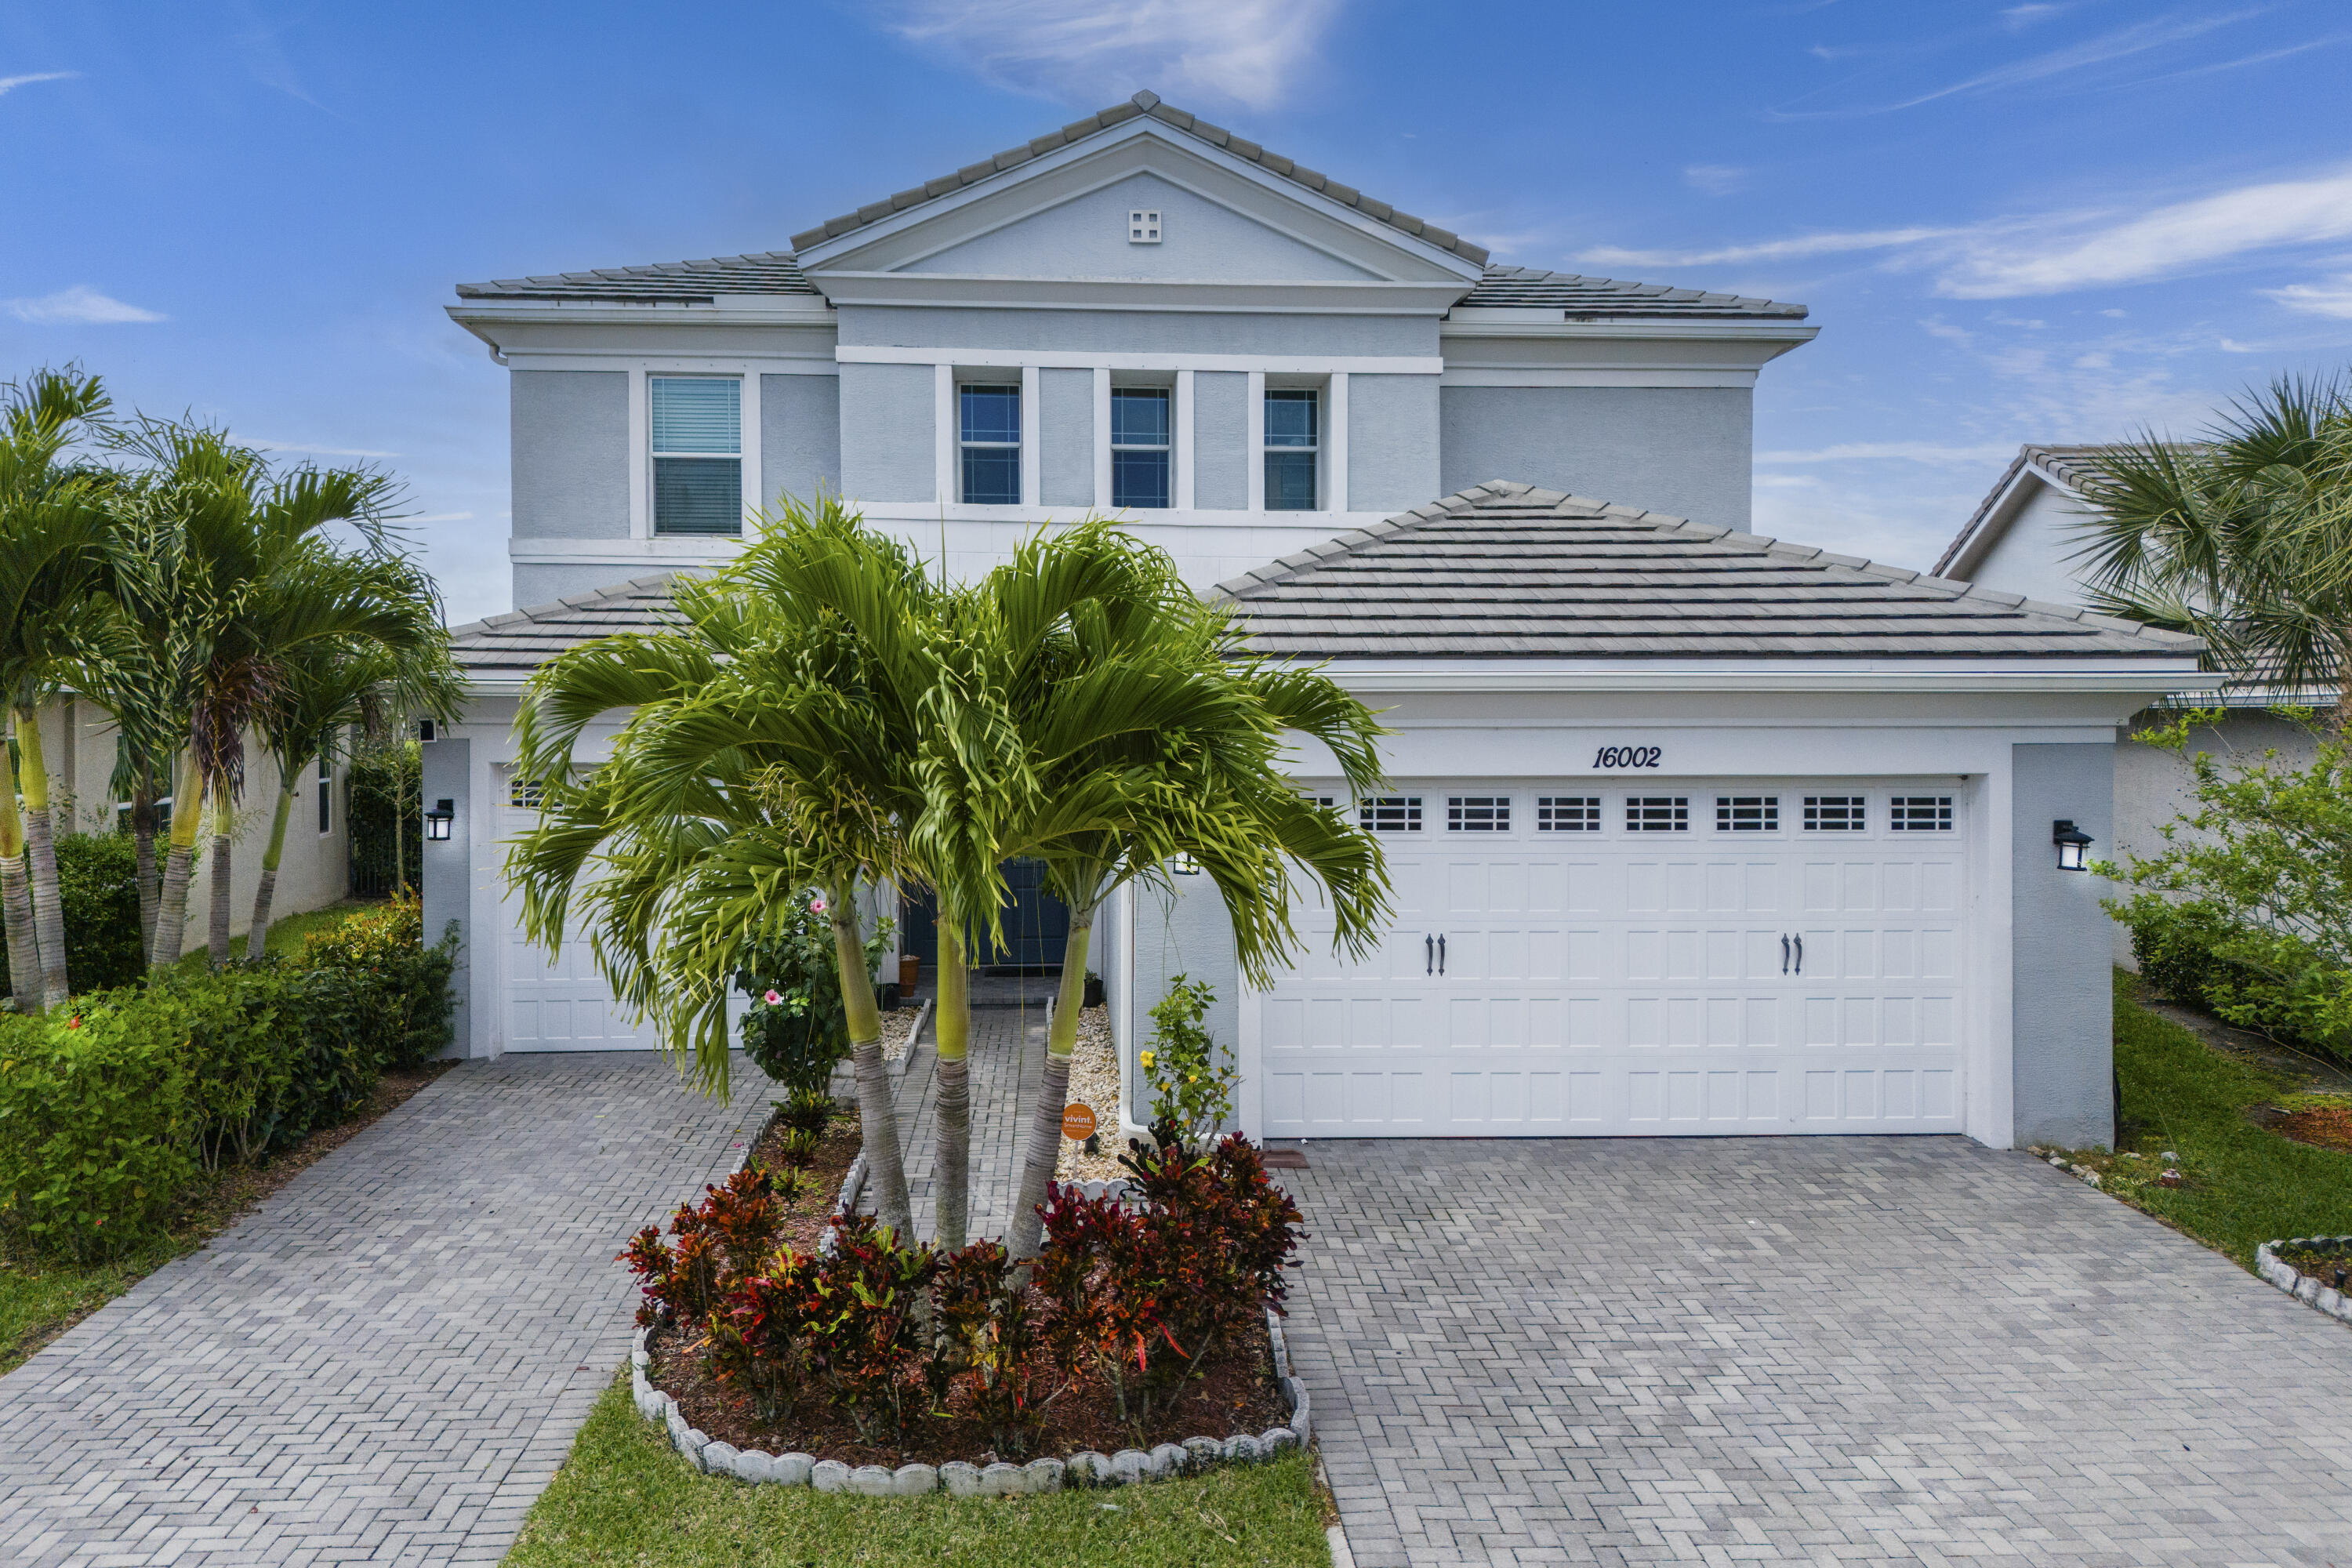 16002 Whippoorwill Circle, Westlake, Palm Beach County, Florida - 4 Bedrooms  
3.5 Bathrooms - 